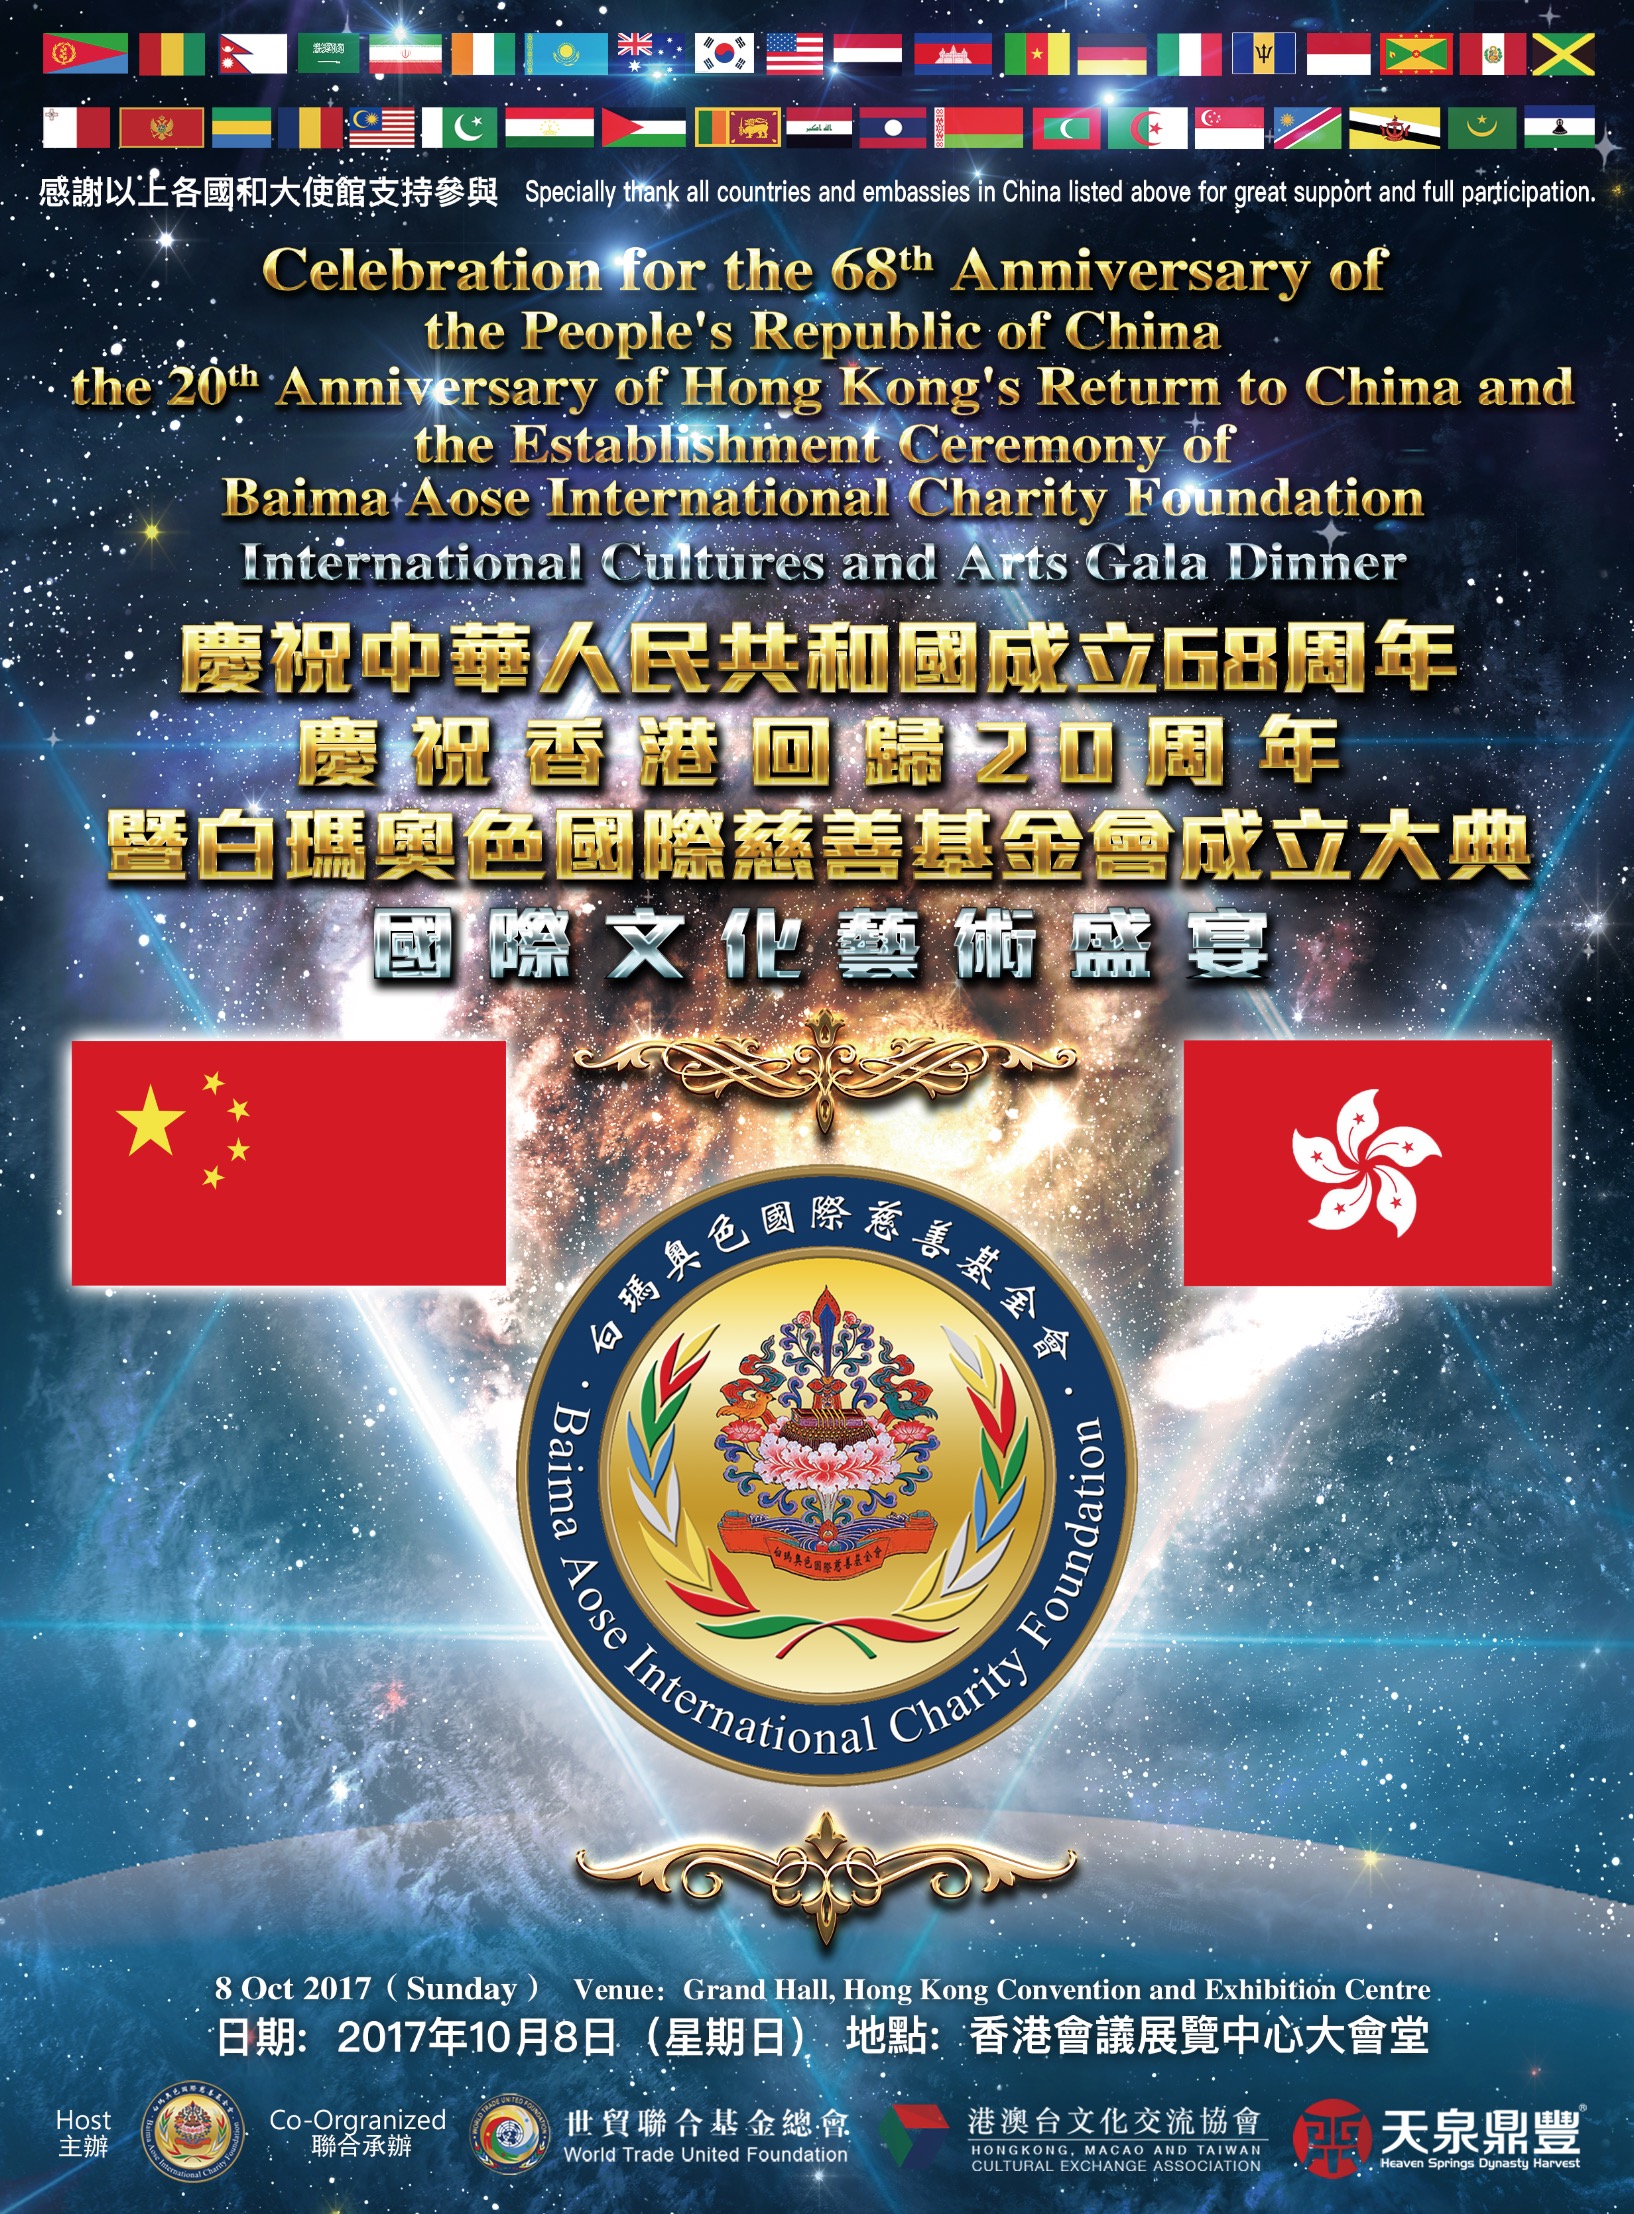 Celebration for the 68th Anniversary of the People's Republic of China, the 20th Anniversary of Hong Kong's Return to China and the Establishment Ceremony of Baima Aose International Charity Foundation
"International Cultures and Arts Gala Dinner"